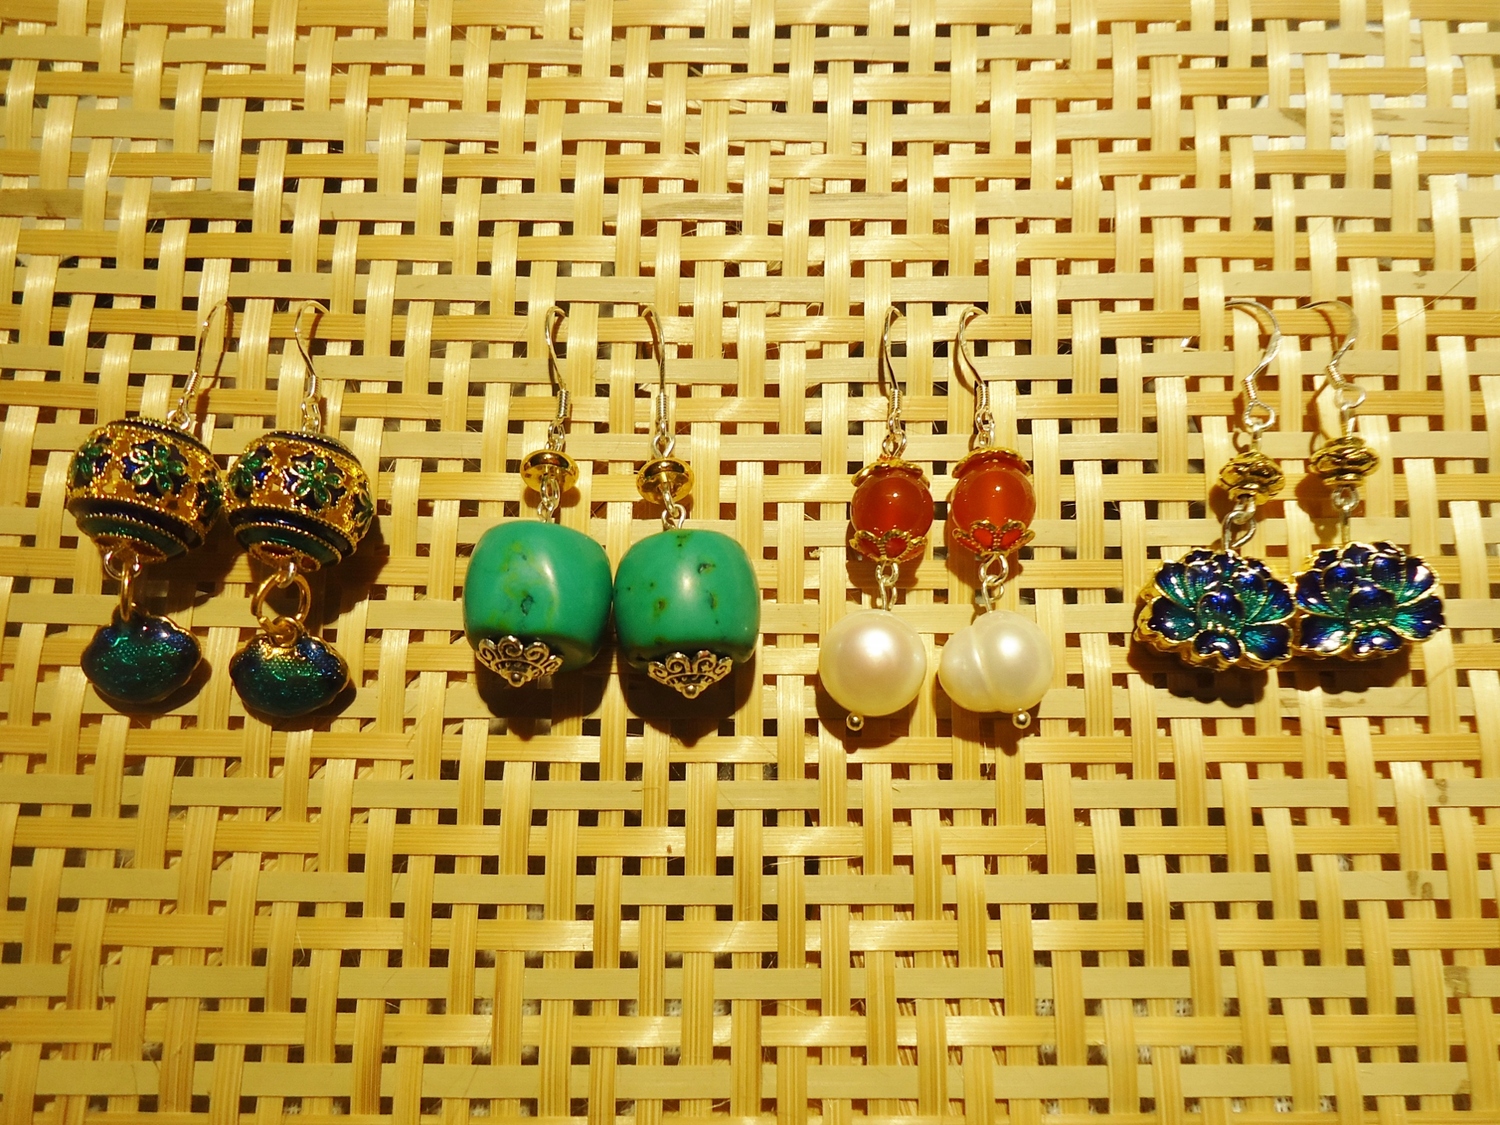 Earrings (c) by Mary of Dongxiang